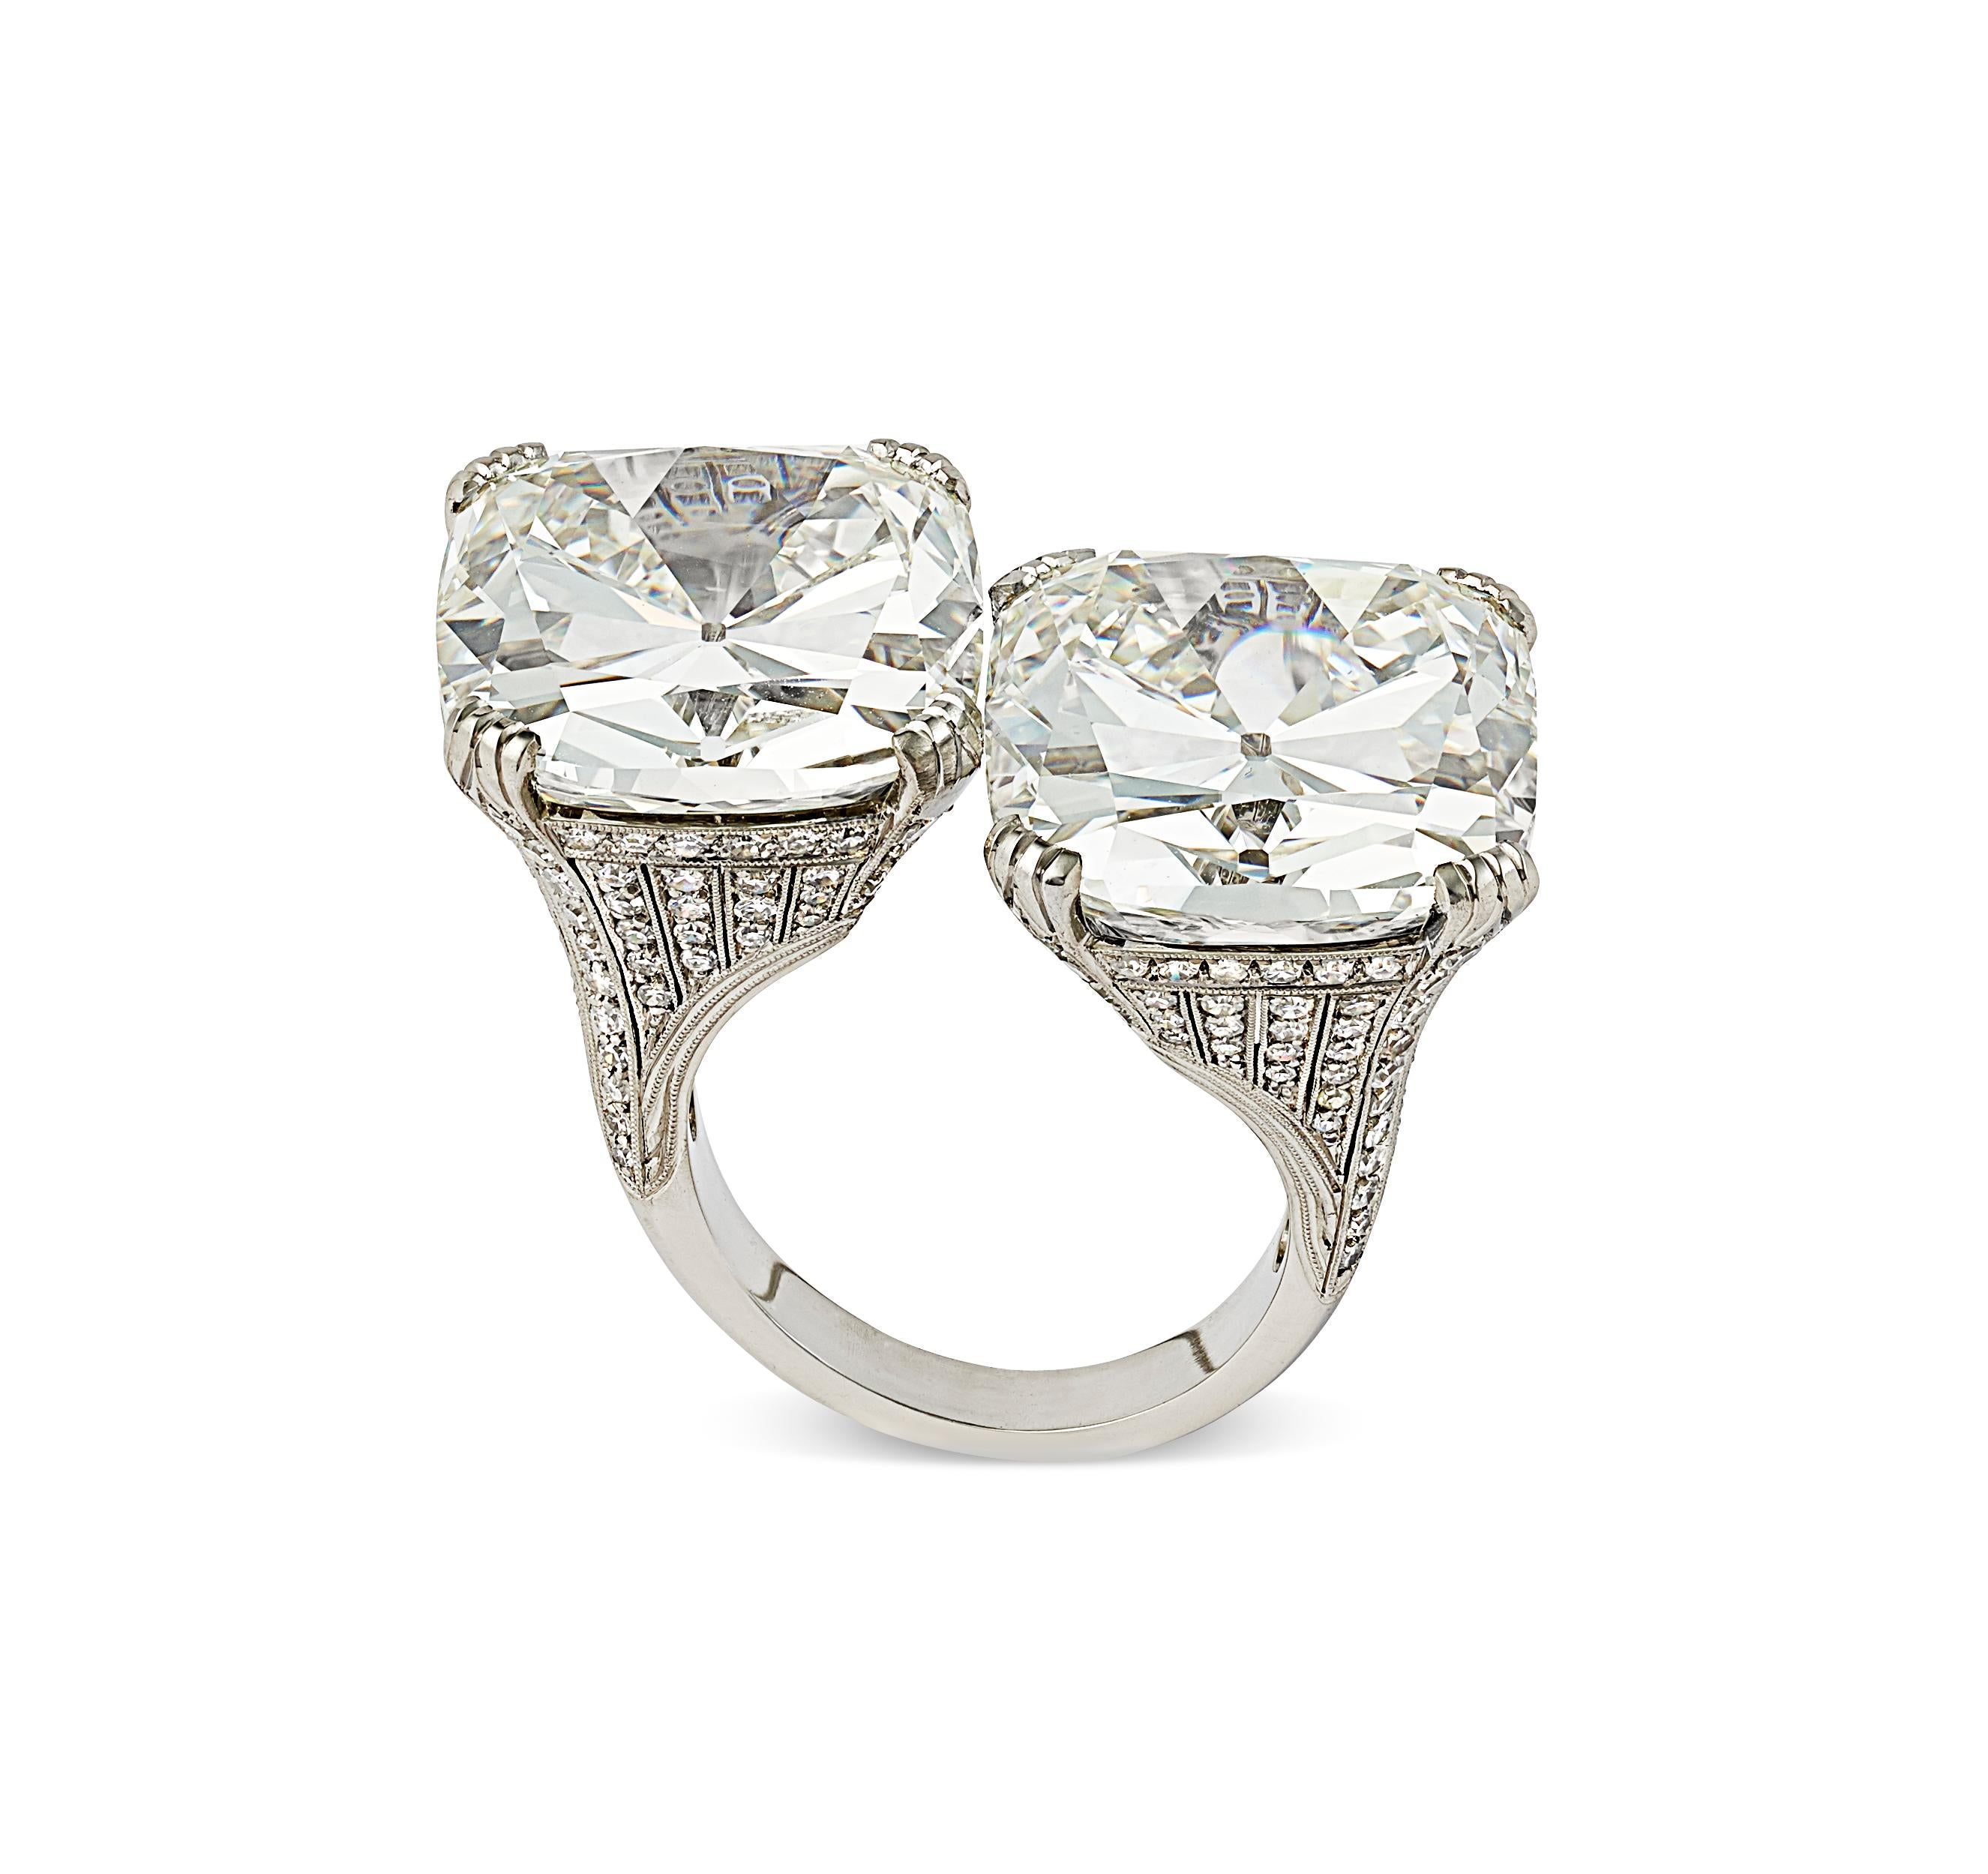 Extraordinary one of the World's largest Cushion cut diamond Crossover rings - 21.24 carats & 20.54 carats by Hancocks.
The exceptional pair of cushion cut diamonds are both K colour and VS2 and SI1 clarity, claw set in a handcrafted finely pierced